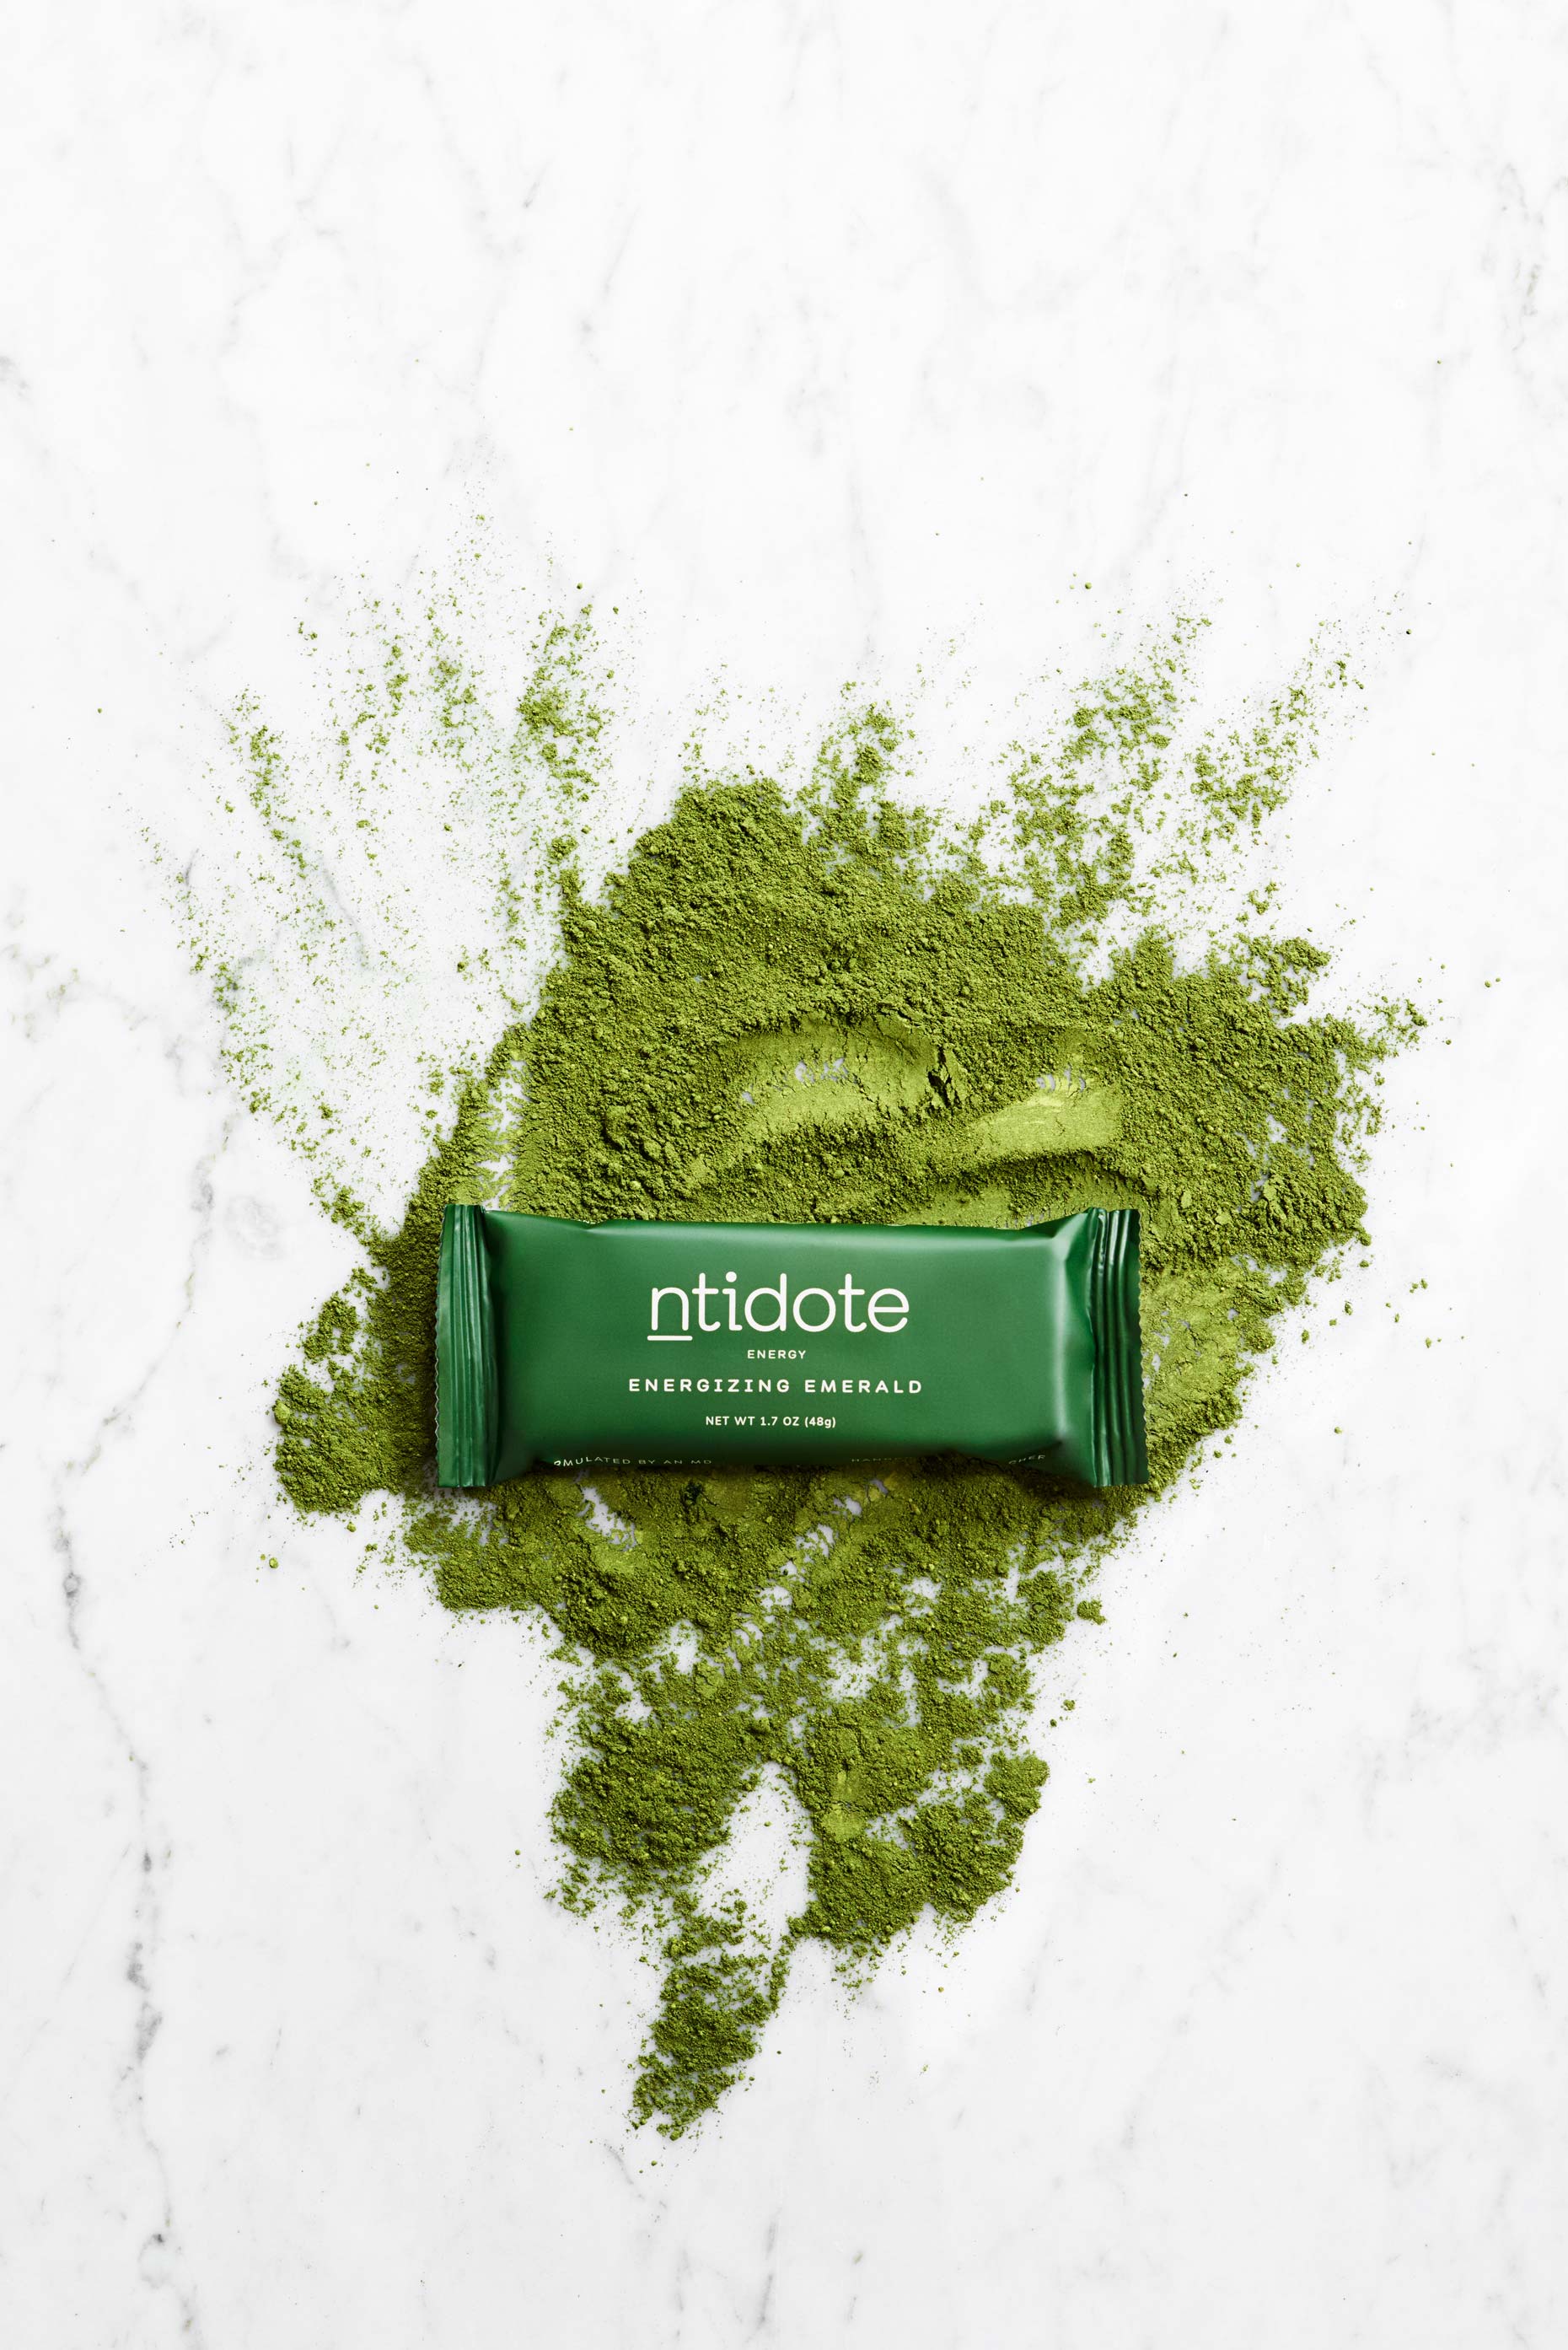 Ntidote Energy Bar photographed by Food Photographer Adrian Mueller New York